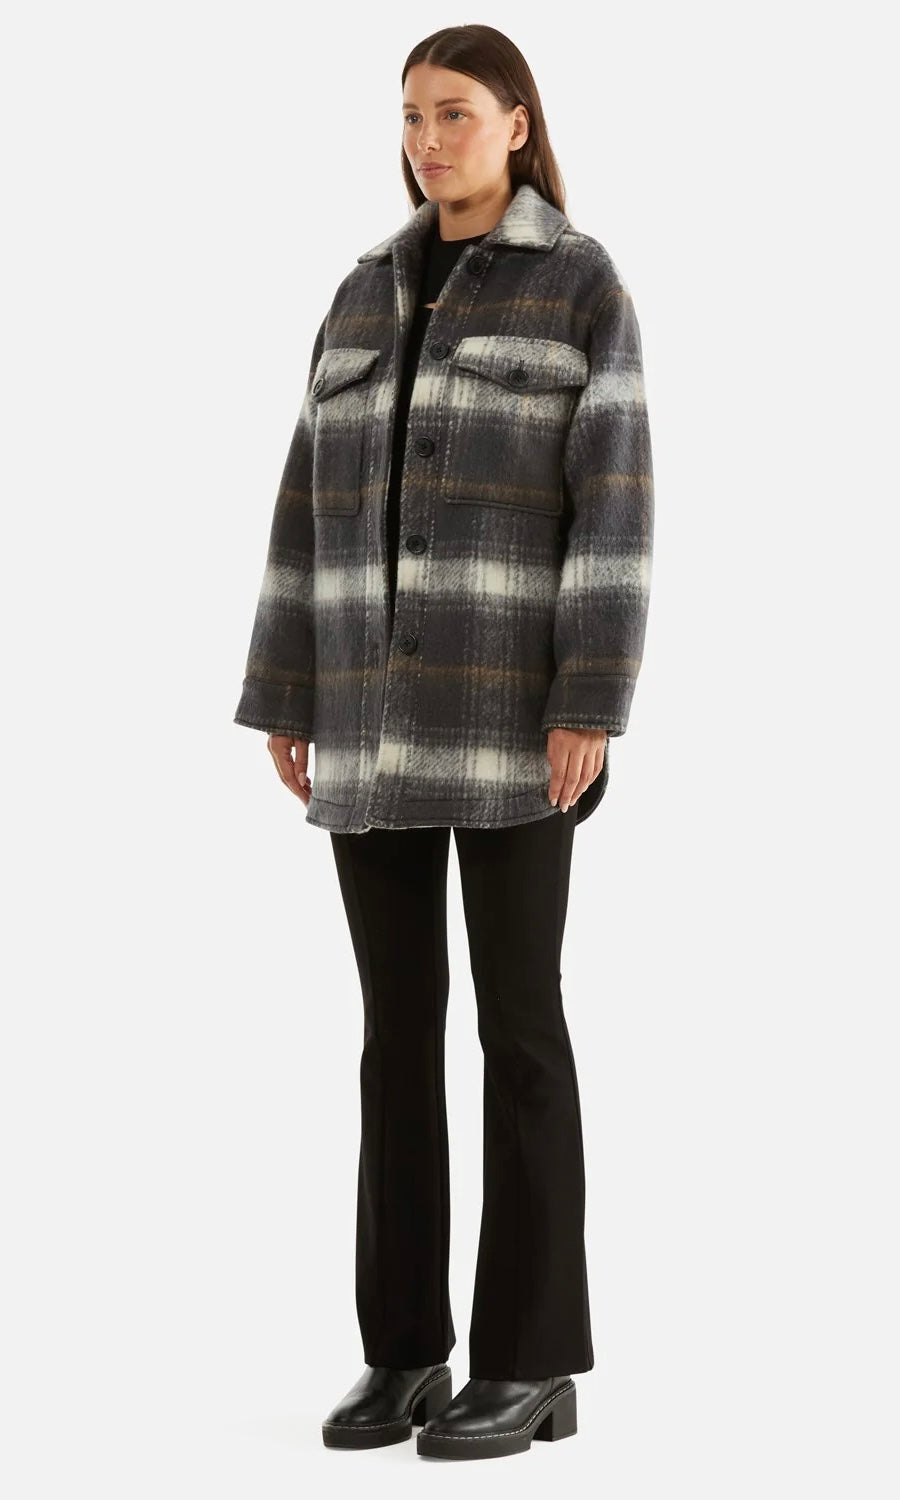 Ena Pelly Natali Wool Shacket In Charcoal Check